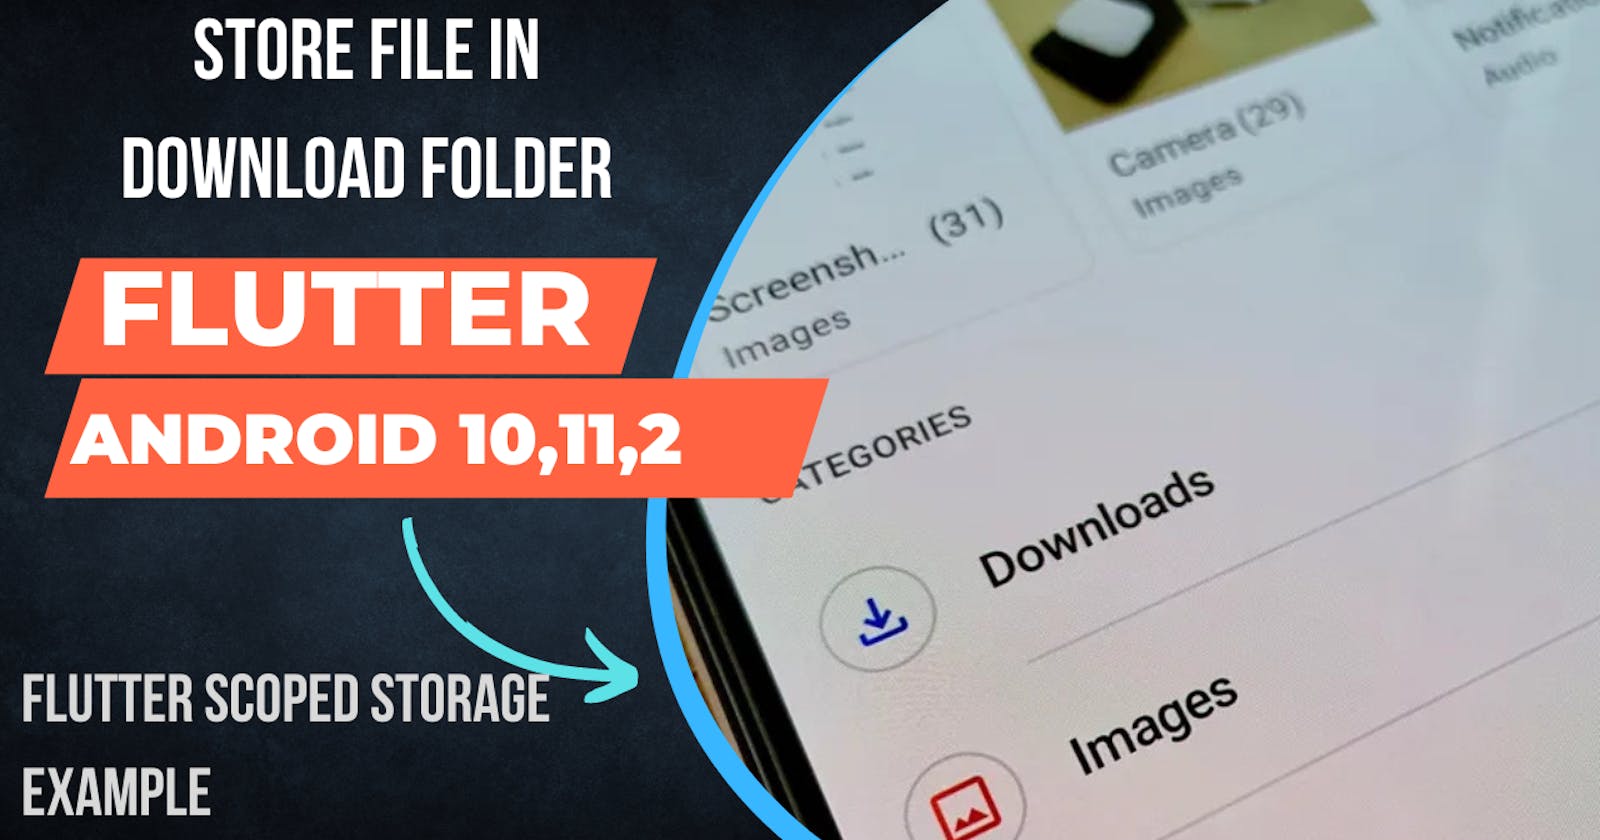 Store file in Download Folder Android 10, 11, 12+ in Flutter.